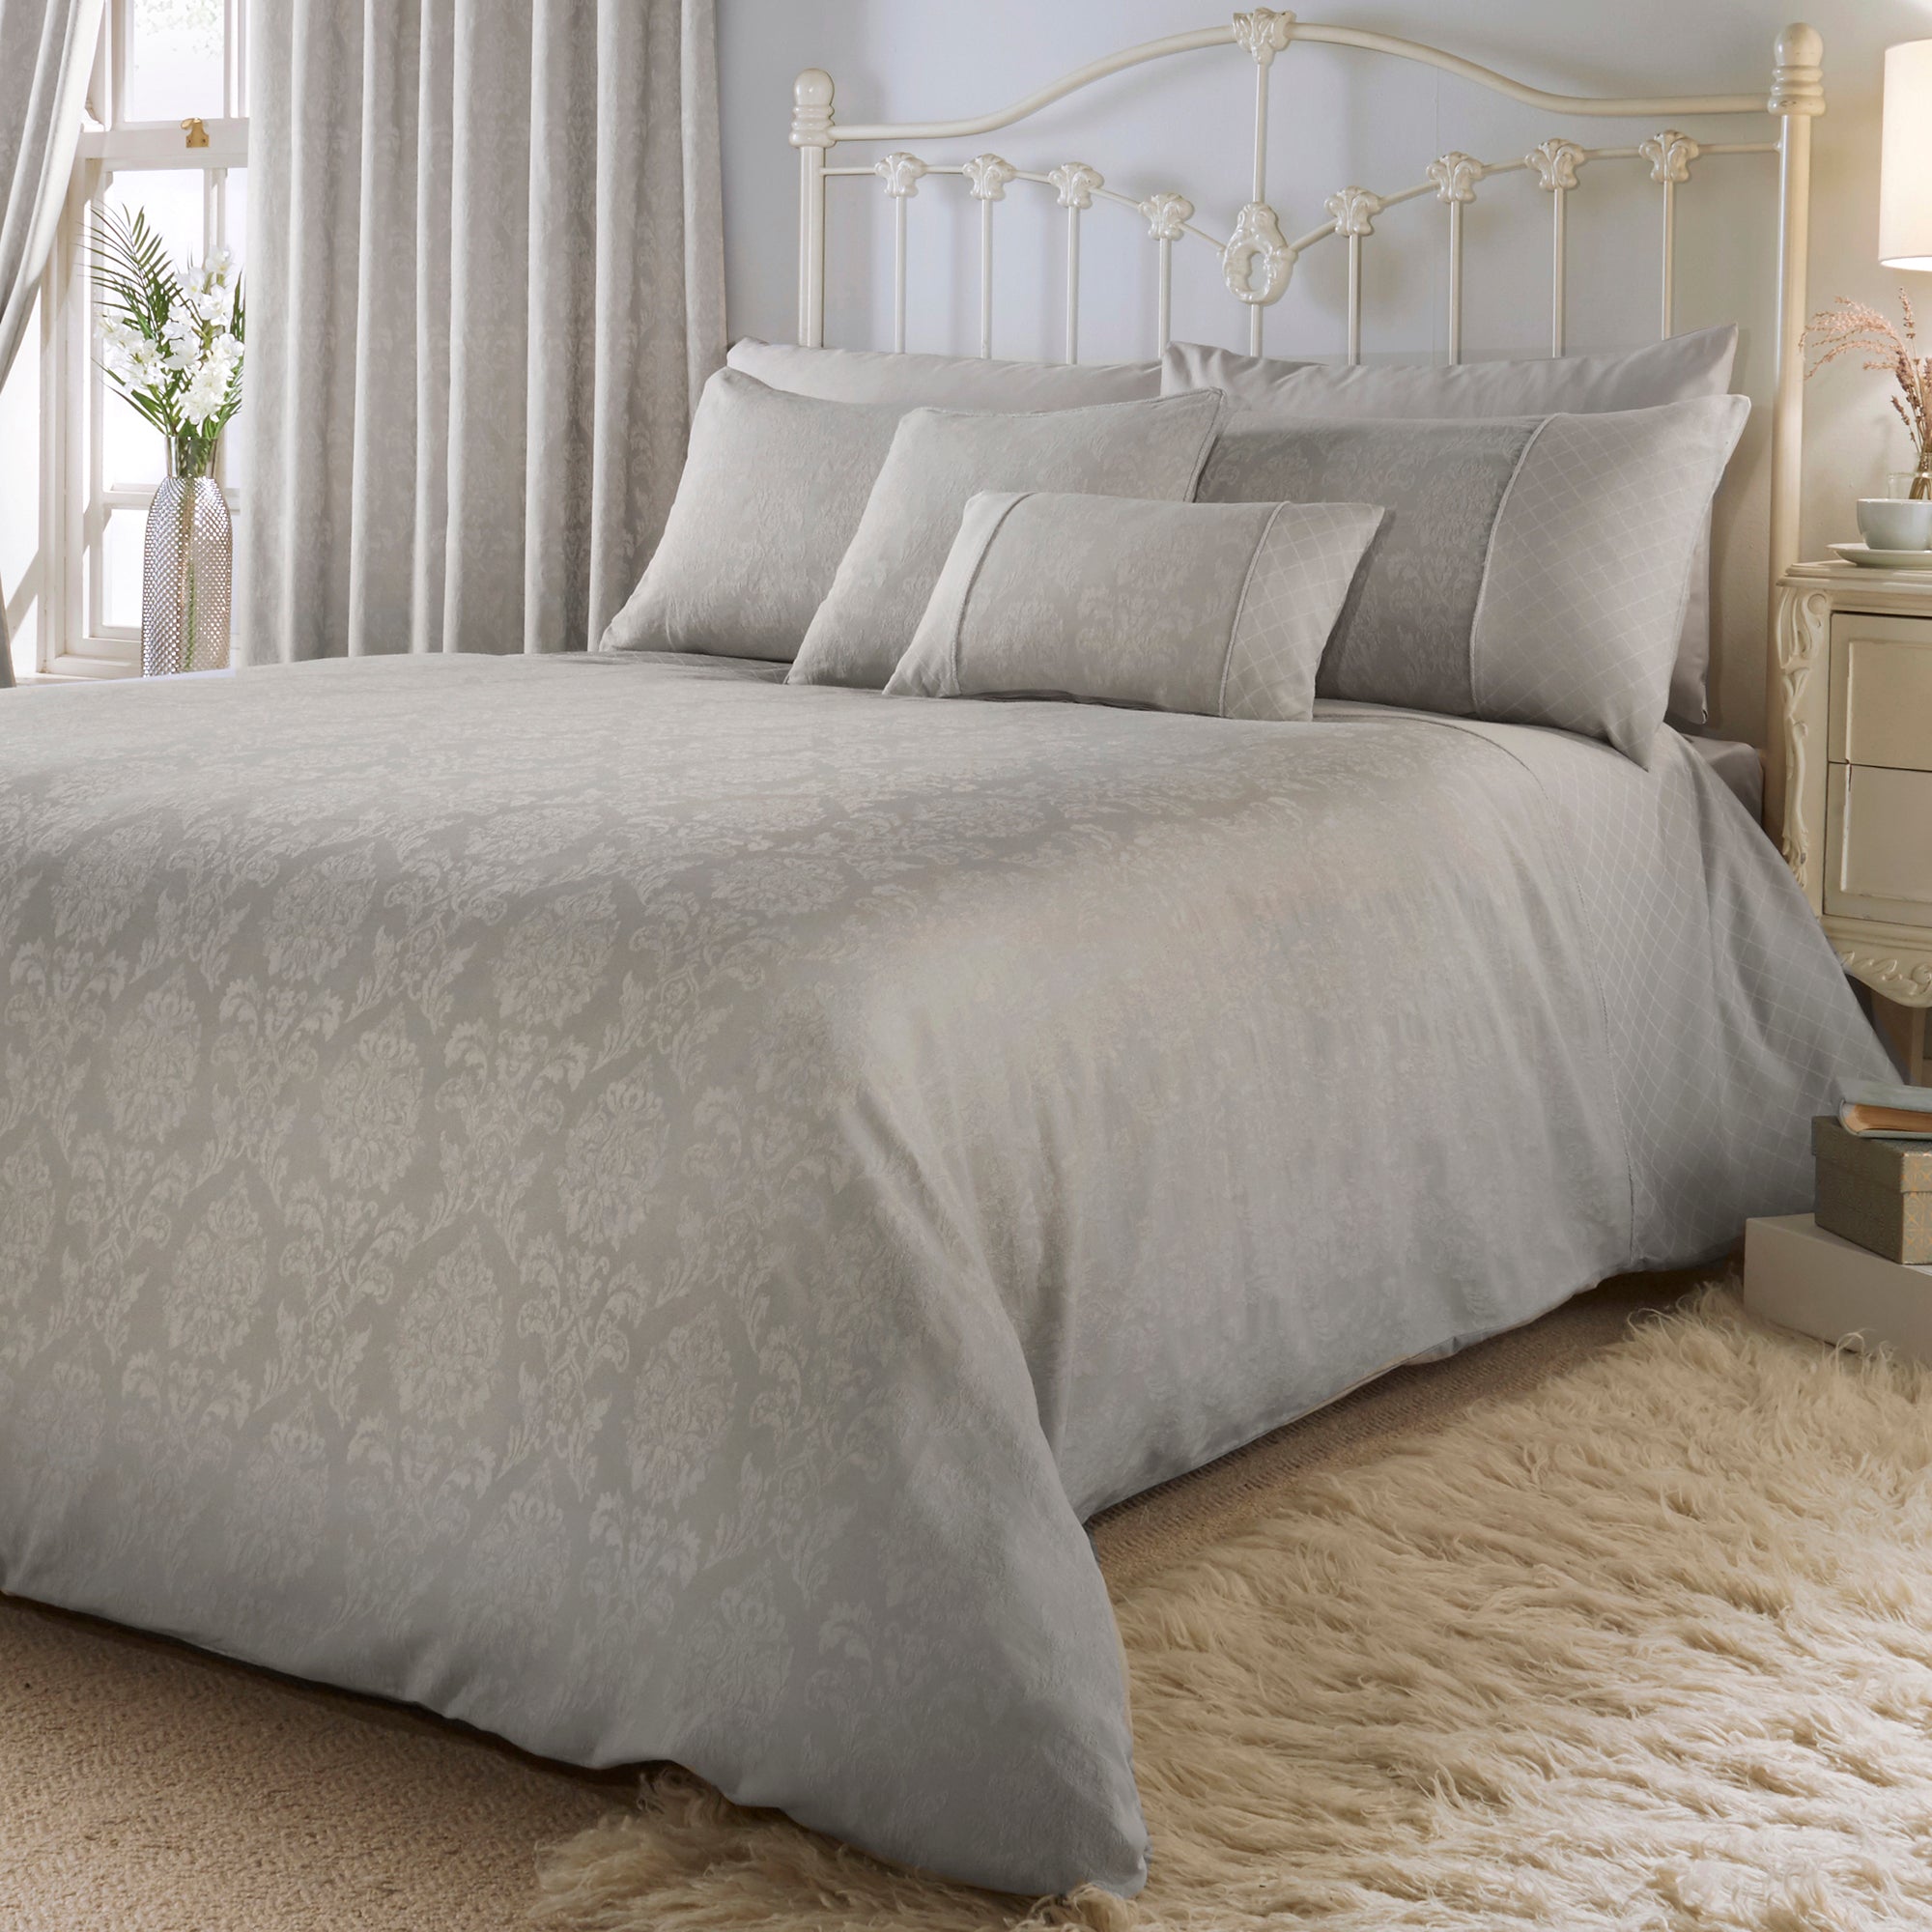 Rosana - Jacquard Duvet Cover Set, Bedspread & Curtains in Silver - by D&D Woven